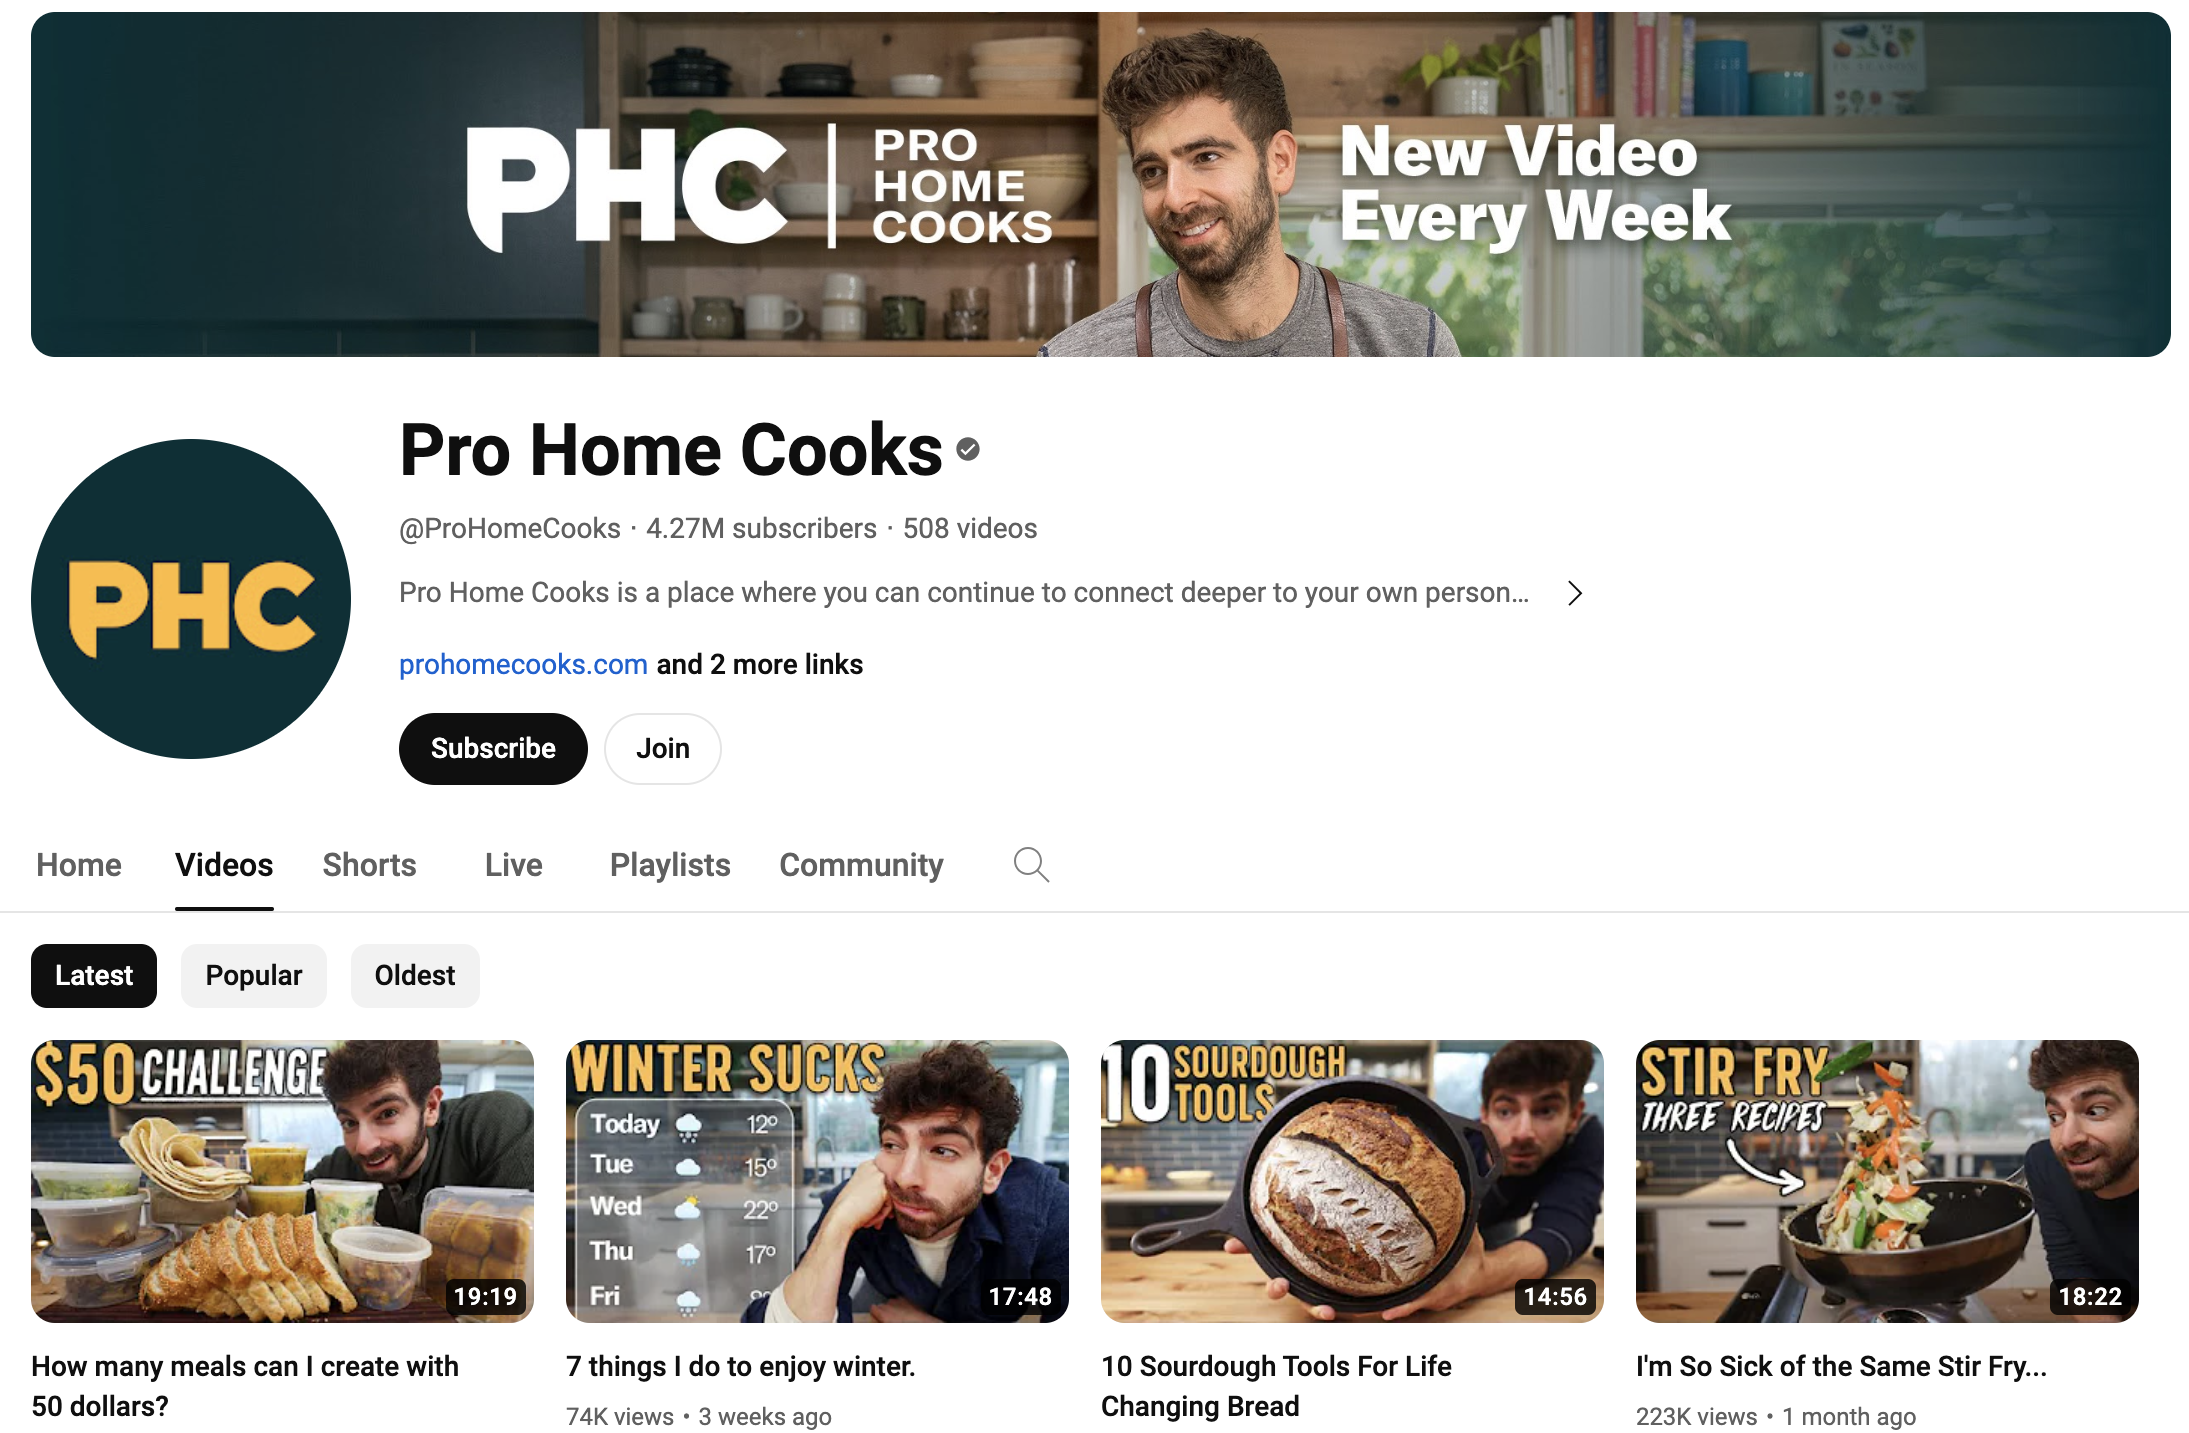 Screenshot of video page for YouTube cooking channel Pro Home Cooks